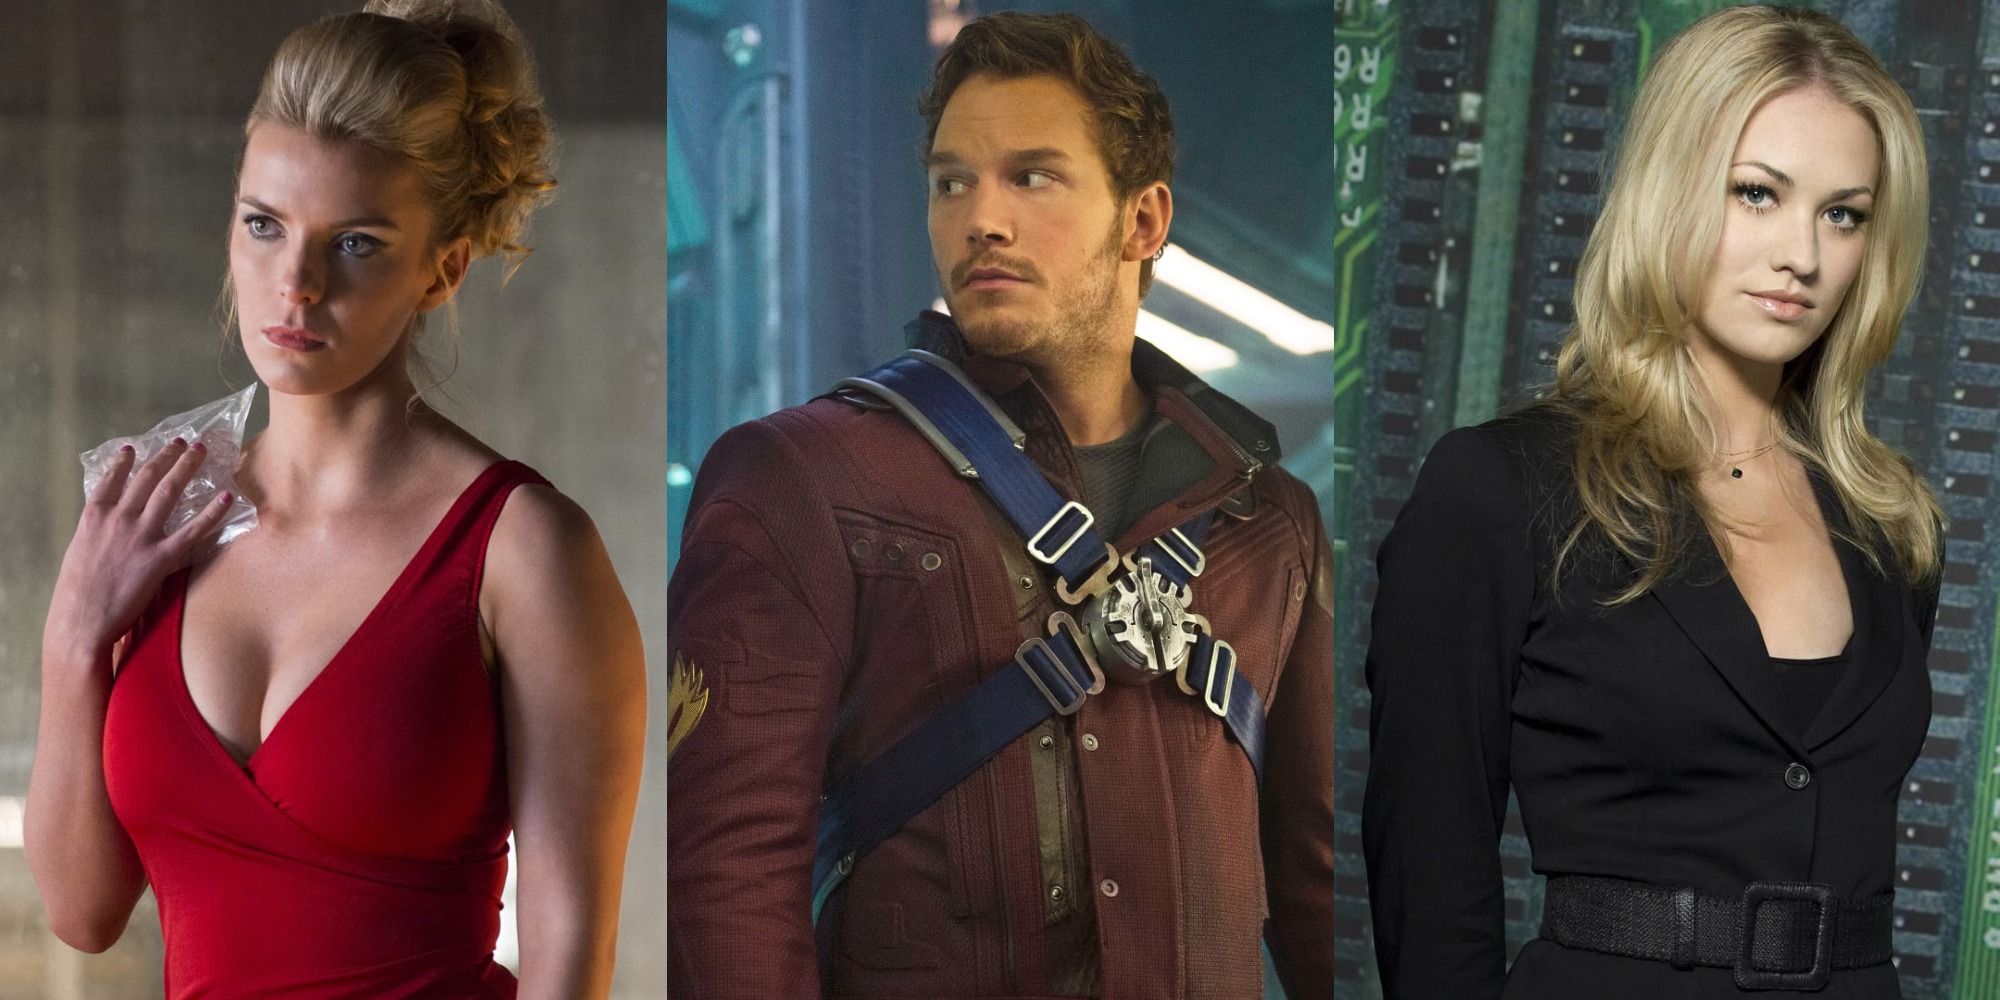 Betty Gilpin in GLOW, Chris Pratt in Guardians of the Galaxy and Yvonne Strahovski in Chuck